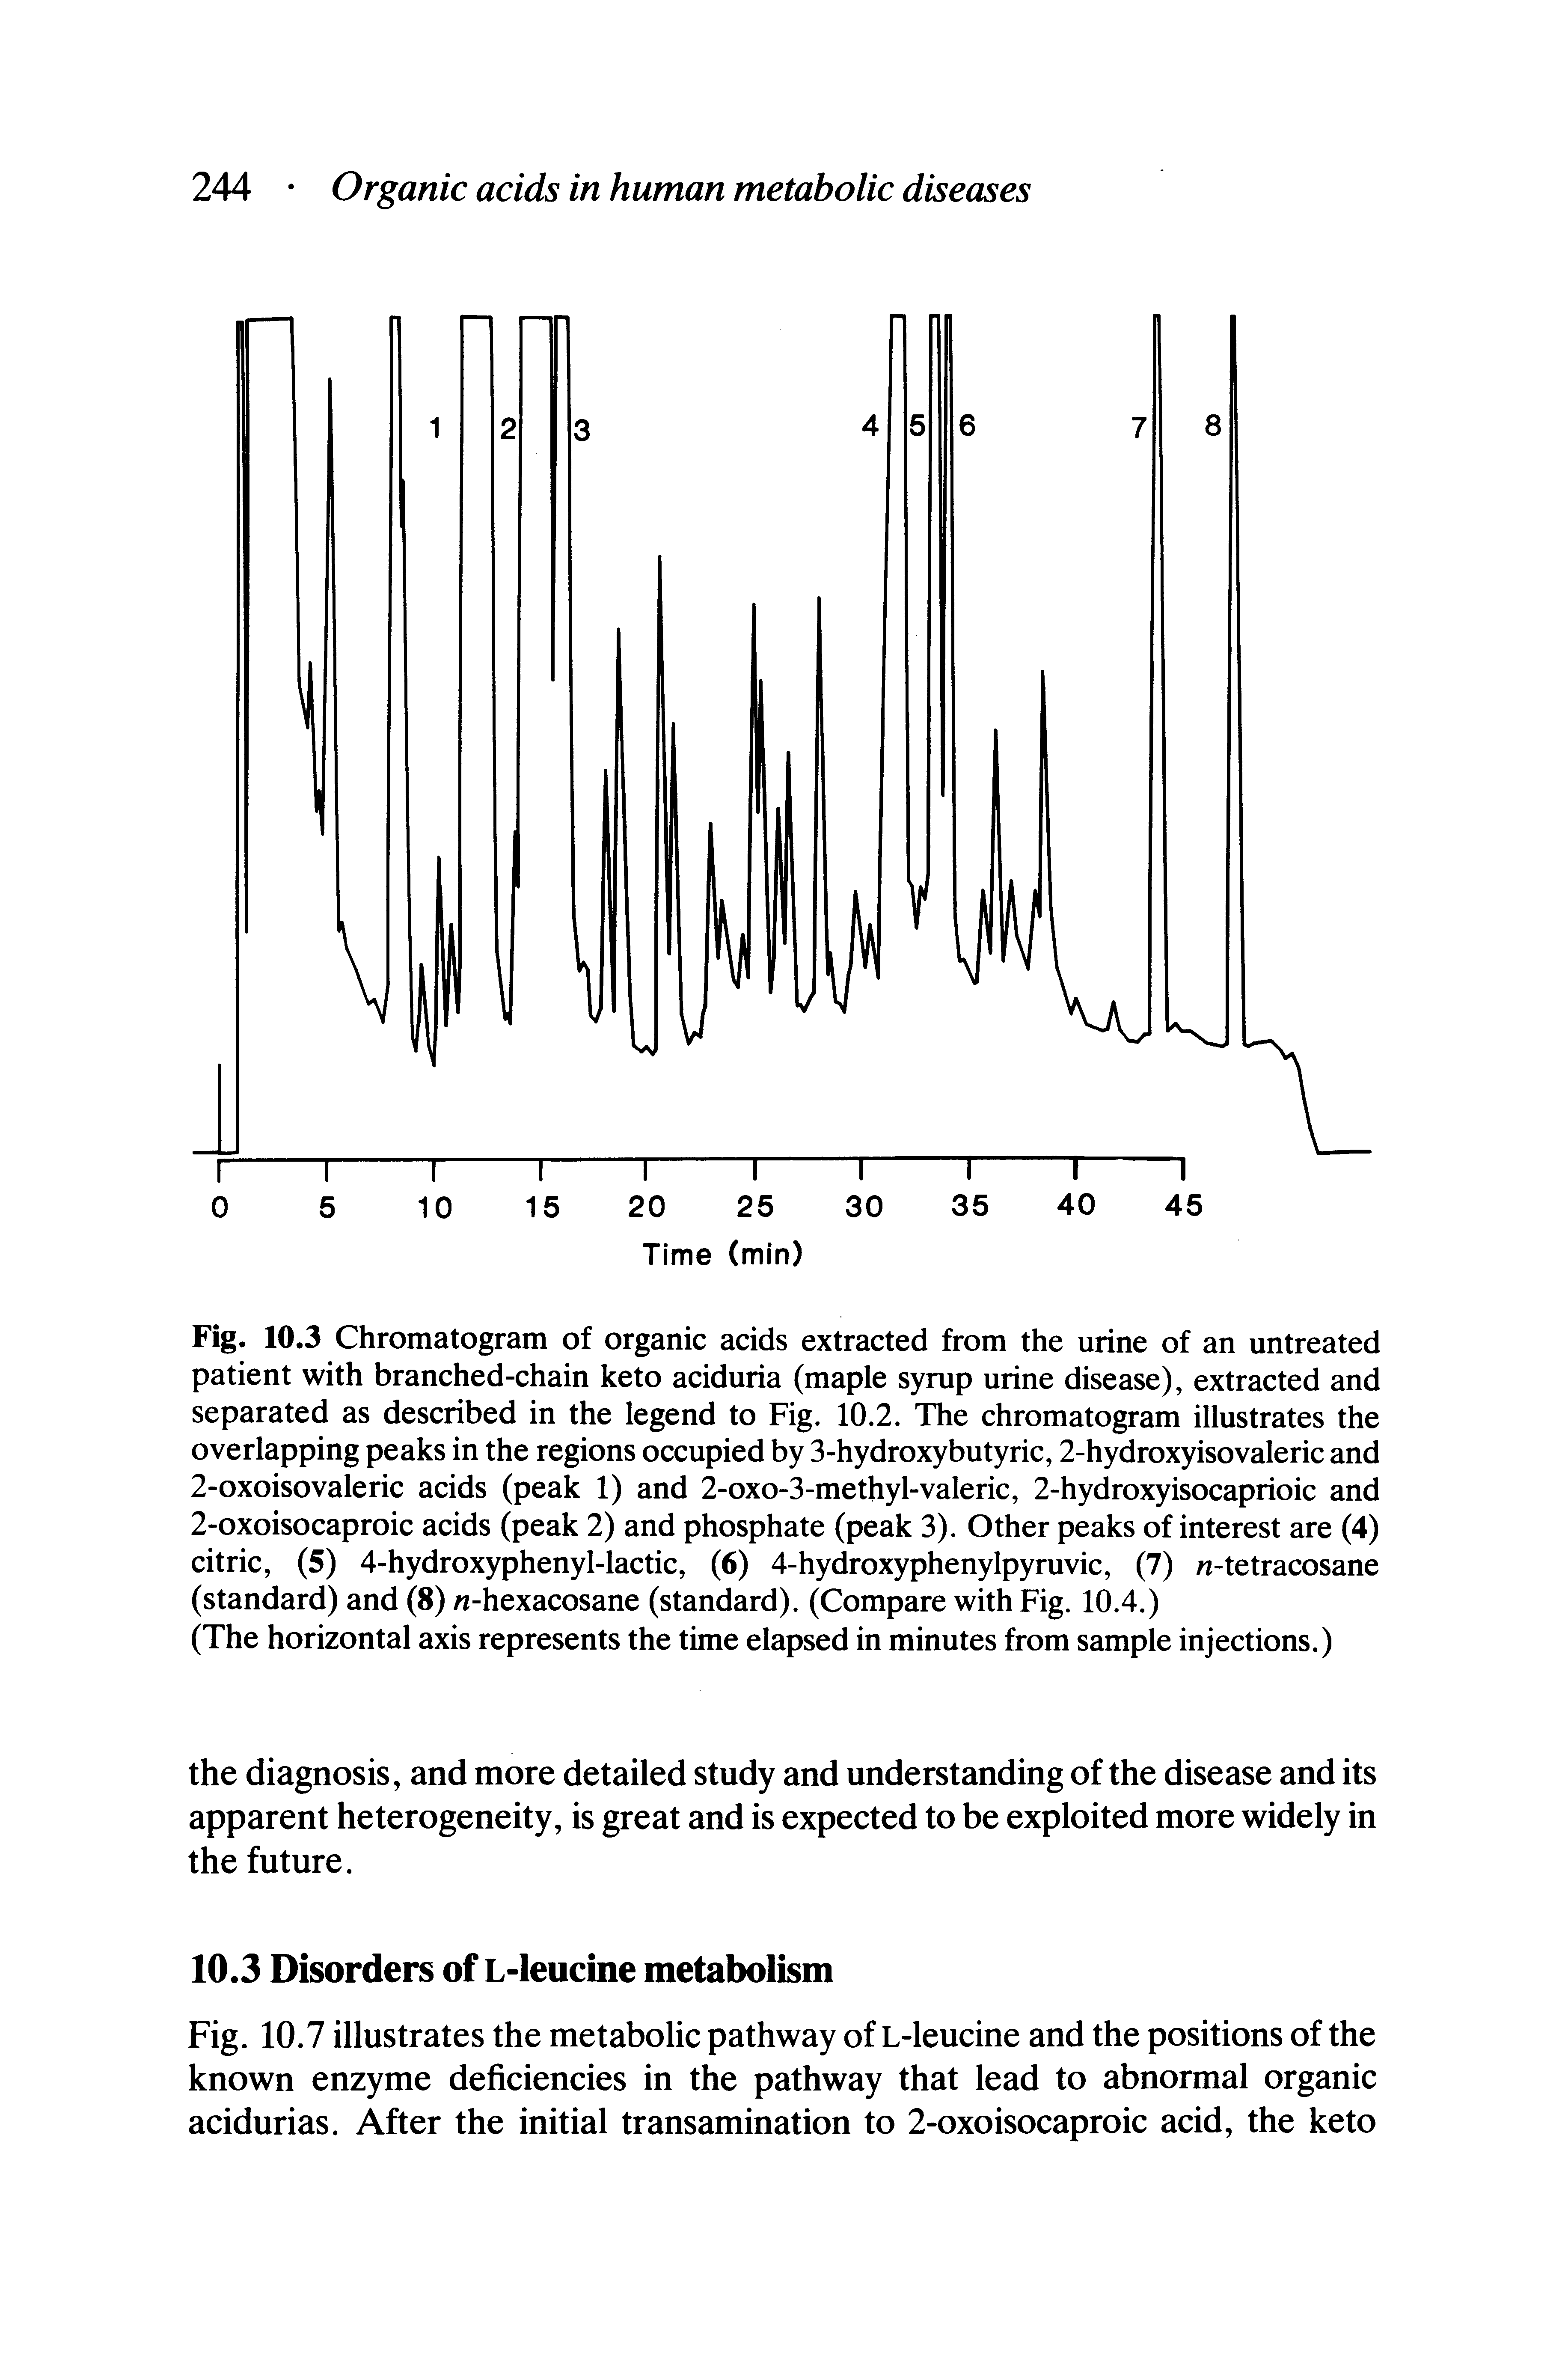 Fig. 10.3 Chromatogram of organic acids extracted from the urine of an untreated patient with branched-chain keto aciduria (maple syrup urine disease), extracted and separated as described in the legend to Fig. 10.2. The chromatogram illustrates the overlapping peaks in the regions occupied by 3-hydroxybutyric, 2-hydroxyisovaleric and 2-oxoisovaleric acids (peak 1) and 2-oxo-3-methyl-valeric, 2-hydroxyisocaprioic and 2-oxoisocaproic acids (peak 2) and phosphate (peak 3). Other peaks of interest are (4) citric, (5) 4-hydroxyphenyl-lactic, (6) 4-hydroxyphenylpyruvic, (7) n-tetracosane (standard) and (8) -hexacosane (standard). (Compare with Fig. 10.4.)...